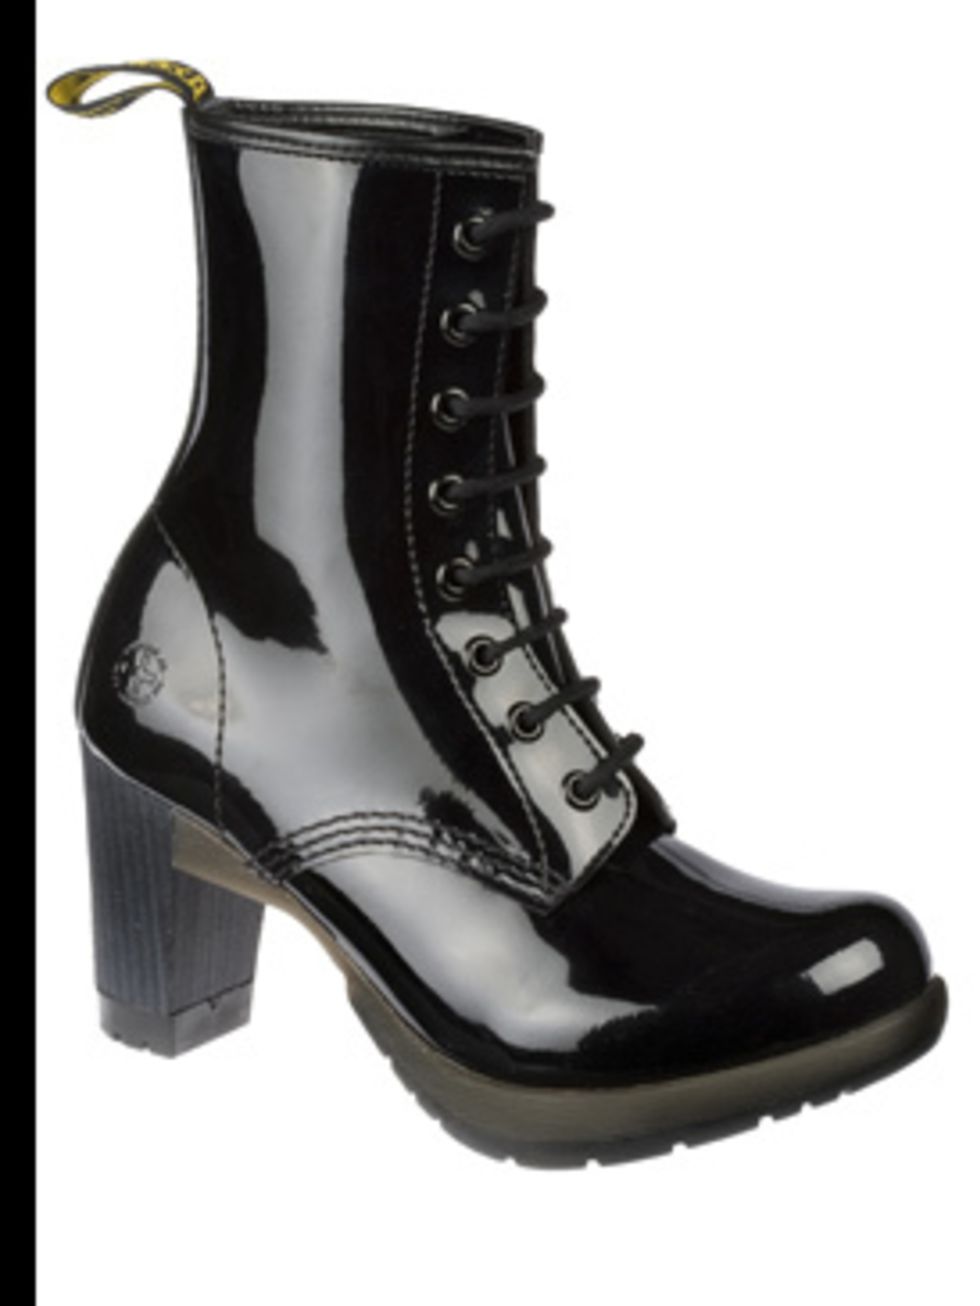 <p>Black patent high heeled boots, £70, by <a href="http://store.drmartens.co.uk/p-3411-darcie.aspx">Dr Martens</a></p>